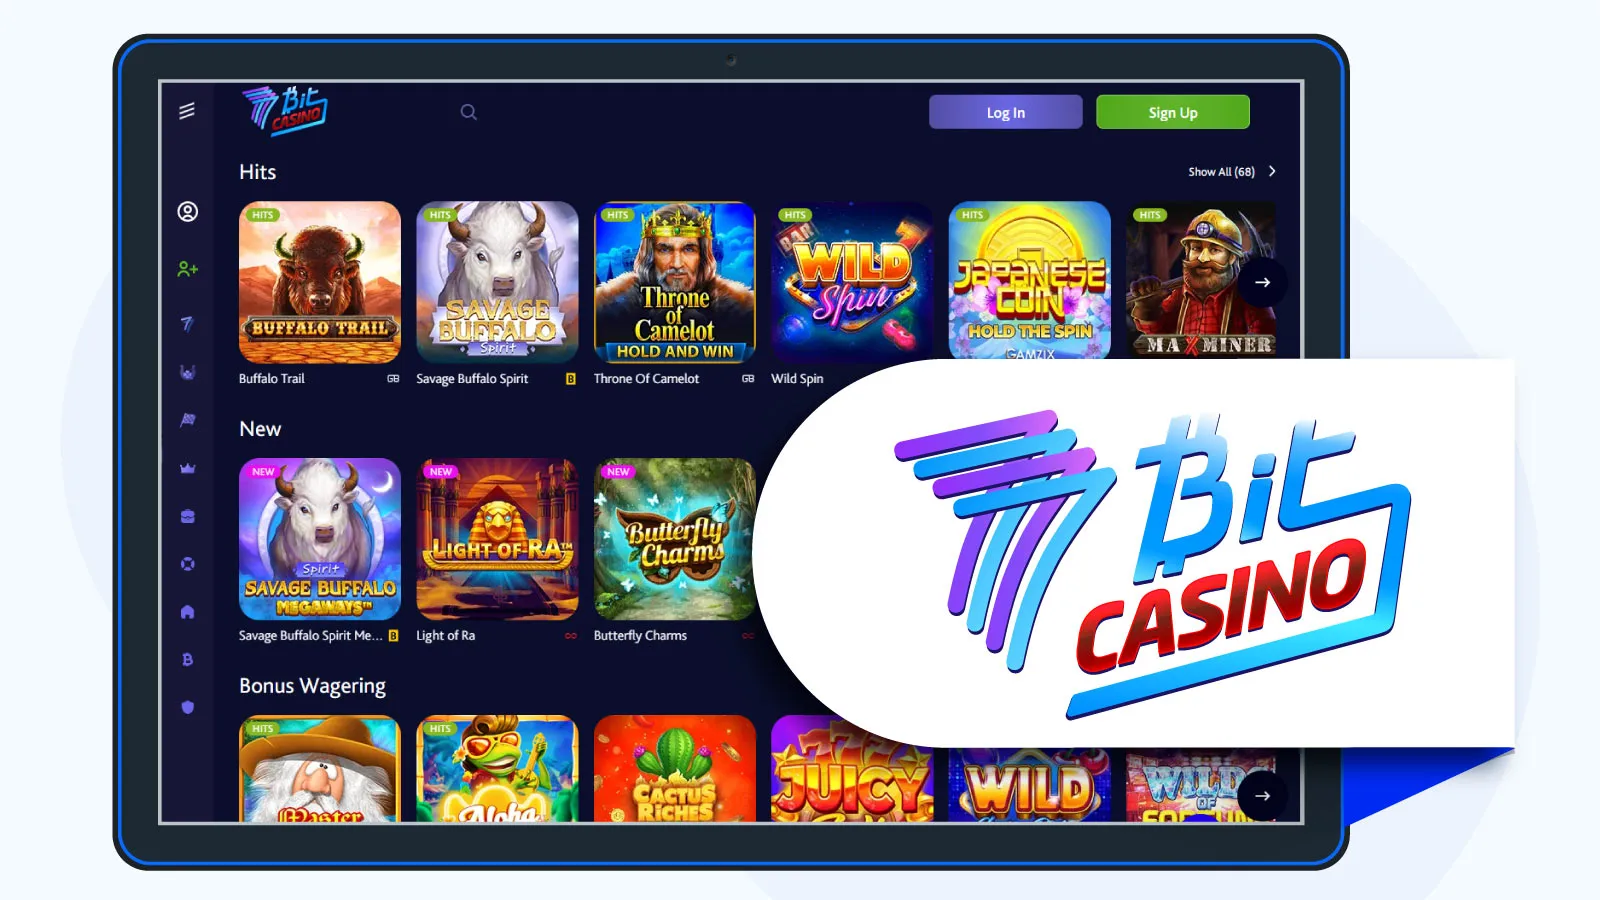 7Bit Casino – Free Spins Central for Mastercard Depositors